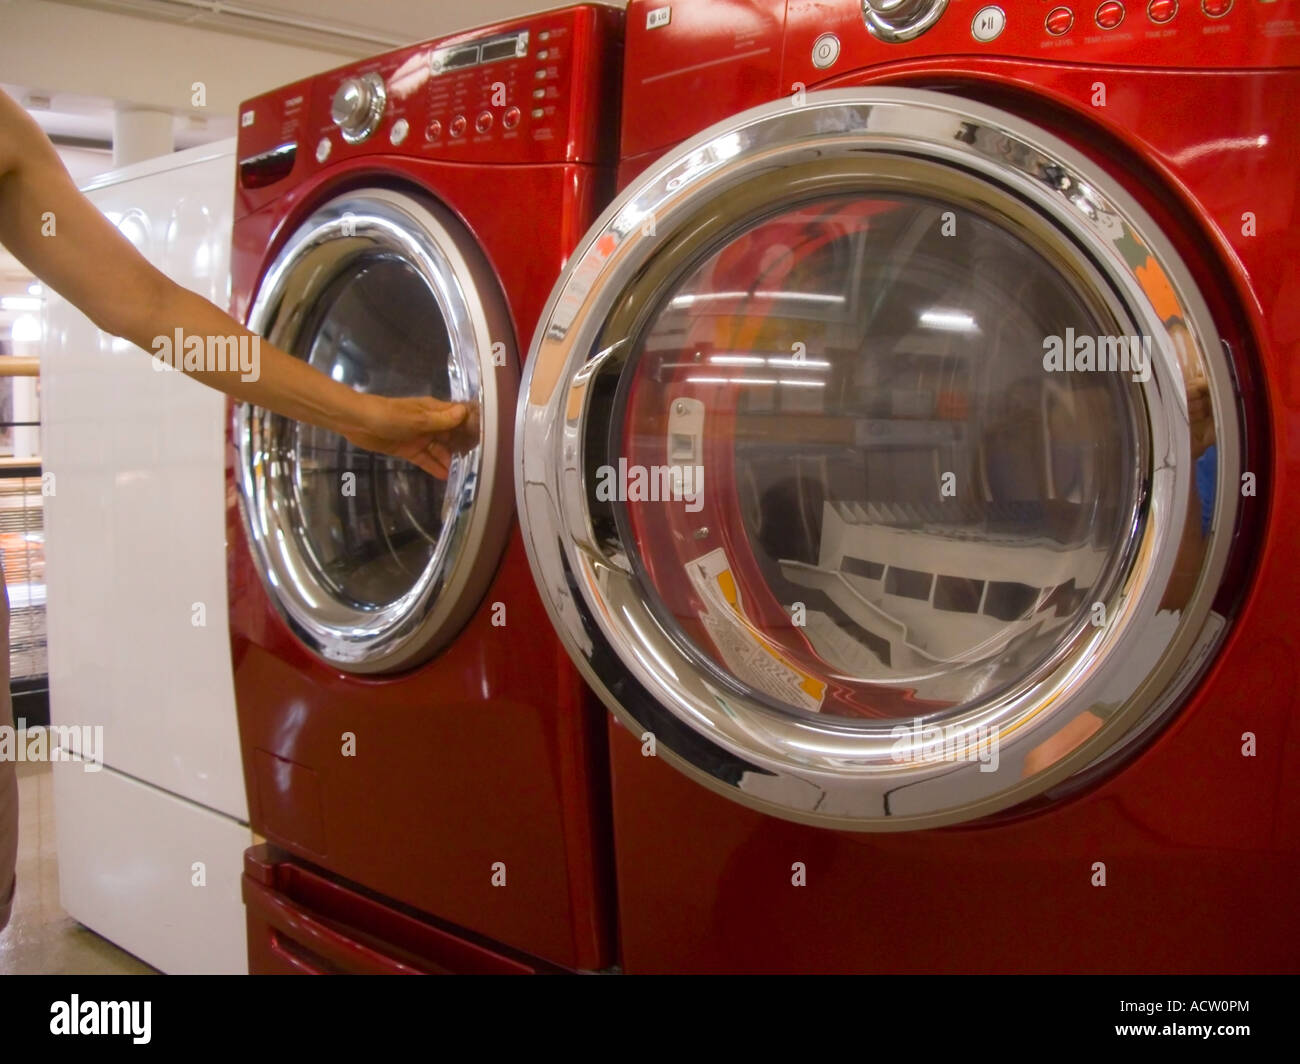 A customer at a Home Depot store in New York City inspects an LG washer  dryer set Stock Photo - Alamy